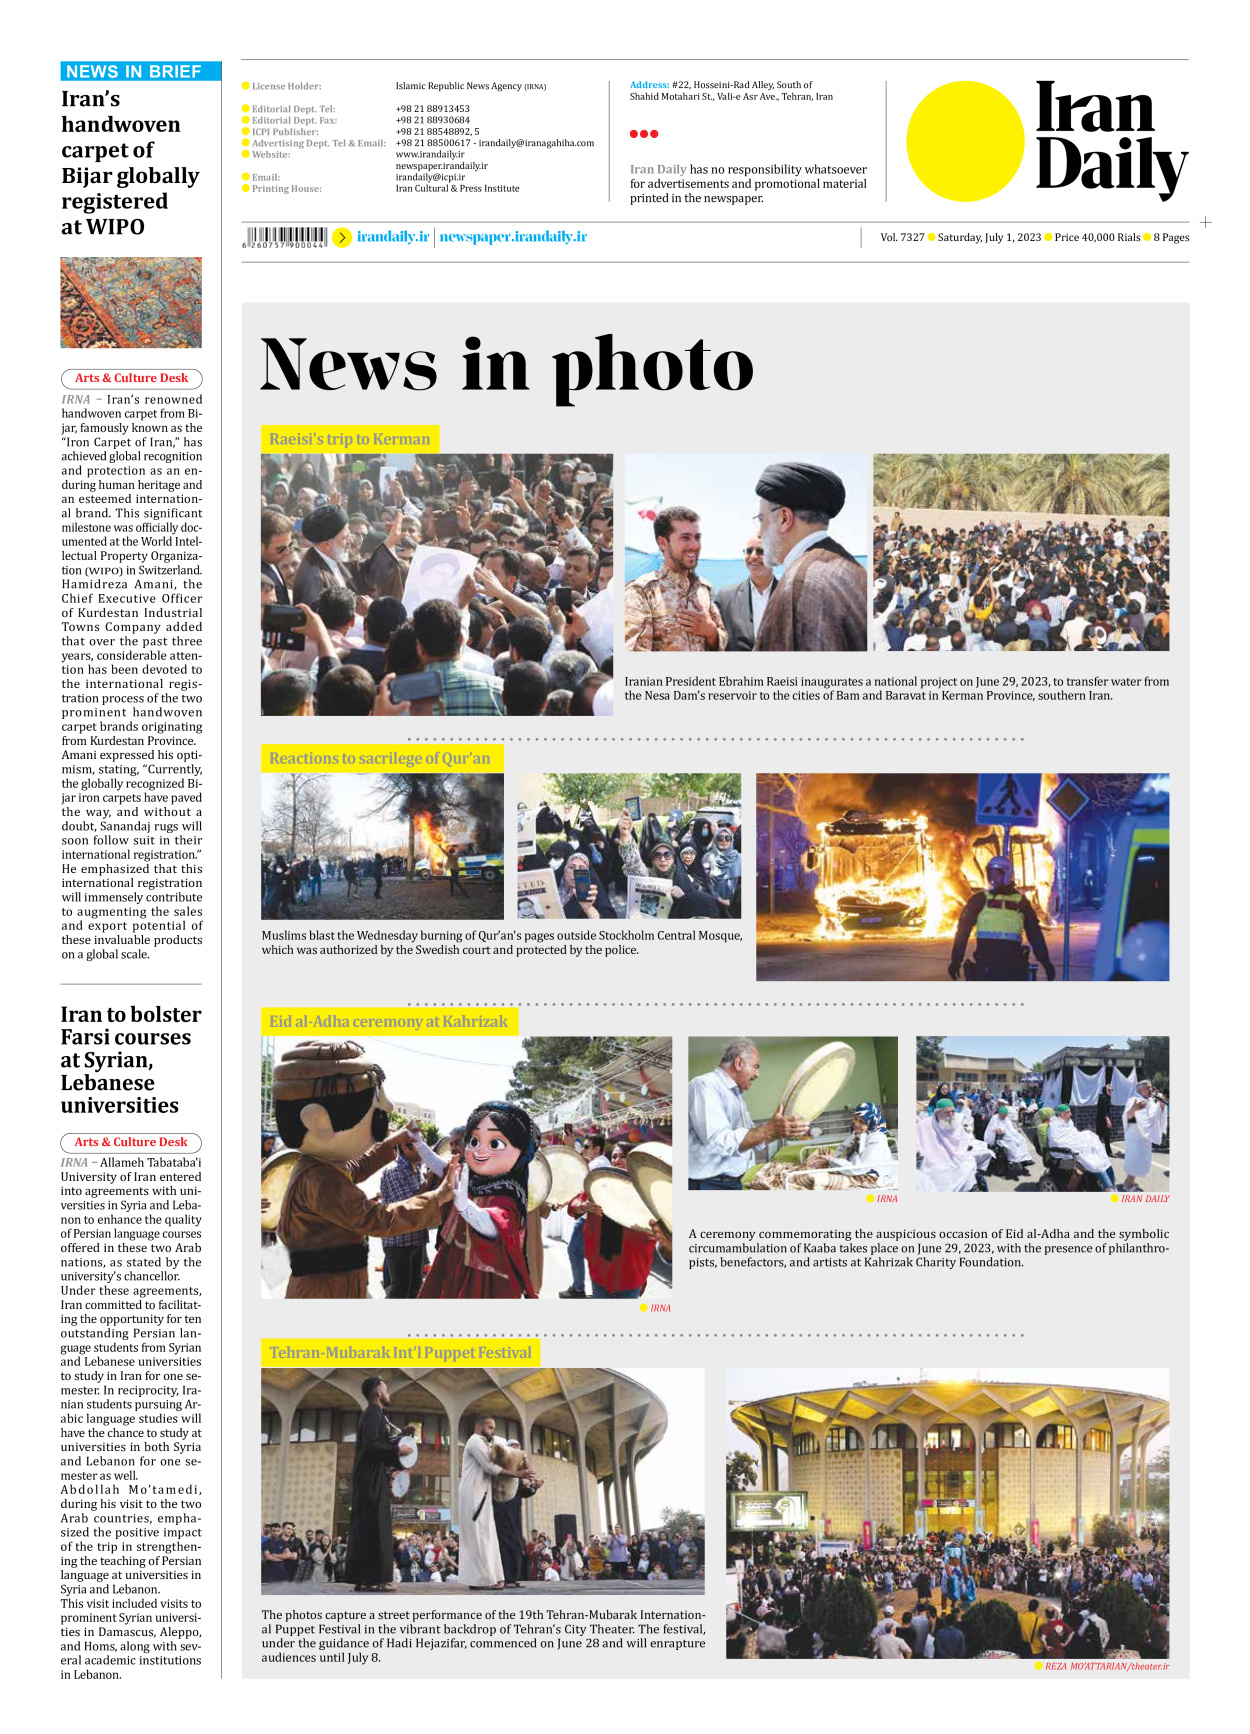 Iran Daily - Number Seven Thousand Three Hundred and Twenty Seven - 01 July 2023 - Page 8